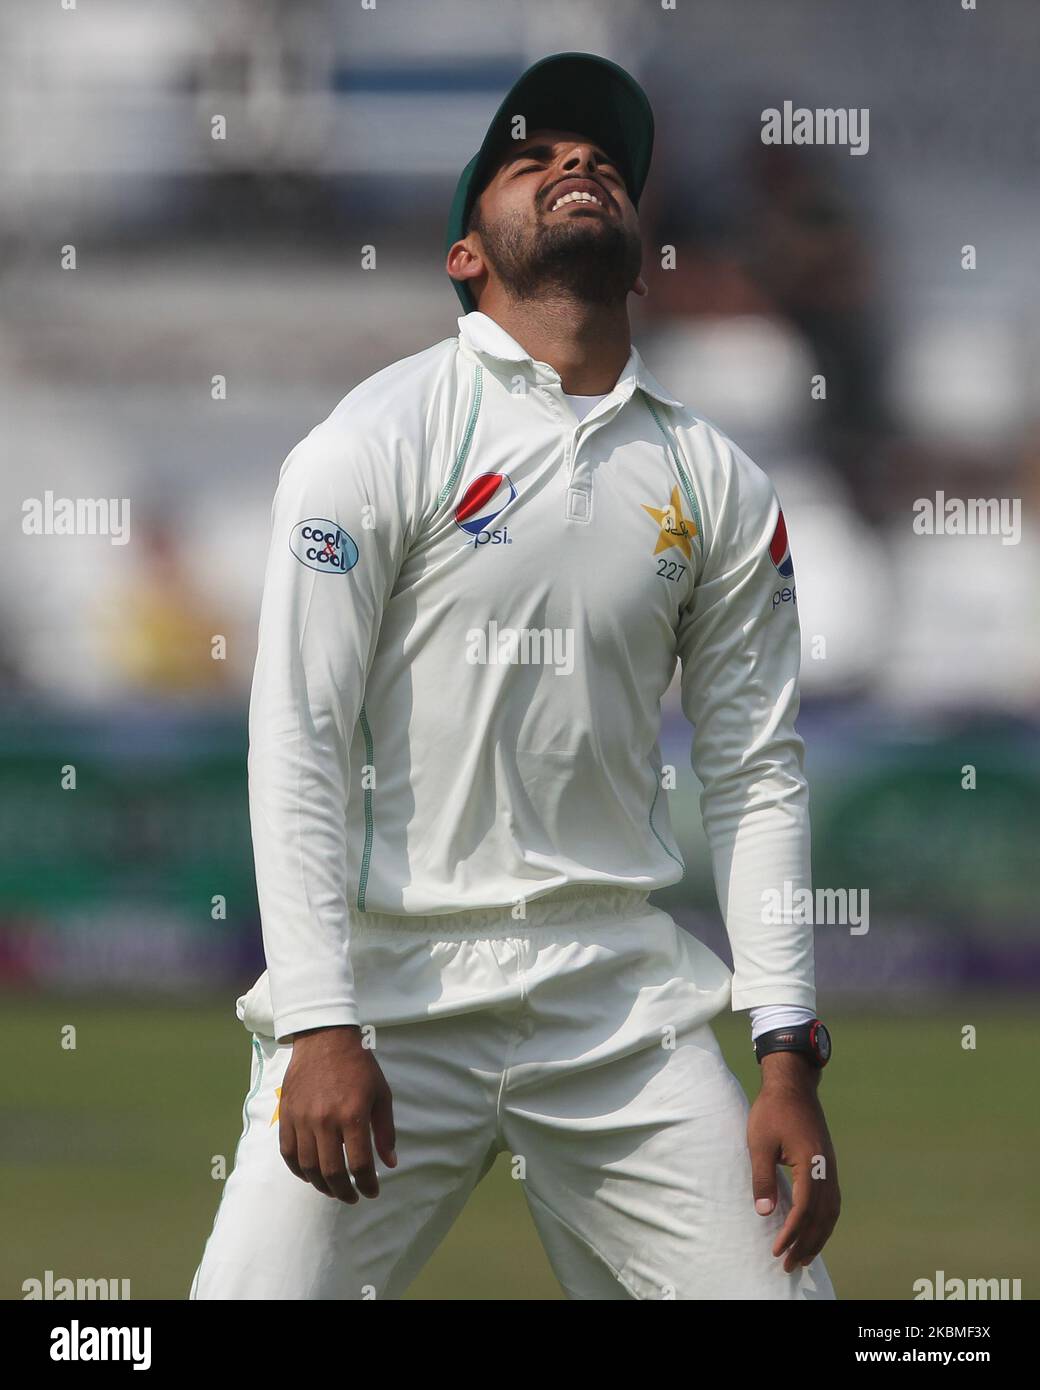 Shadab Khan of Pakistan during the first day of the Second Nat West Test match between England and Pakistan at Headingley Cricket Ground, Leeds on Friday 1st June 2018. (Photo by Mark Fletcher/MI News/NurPhoto) Stock Photo